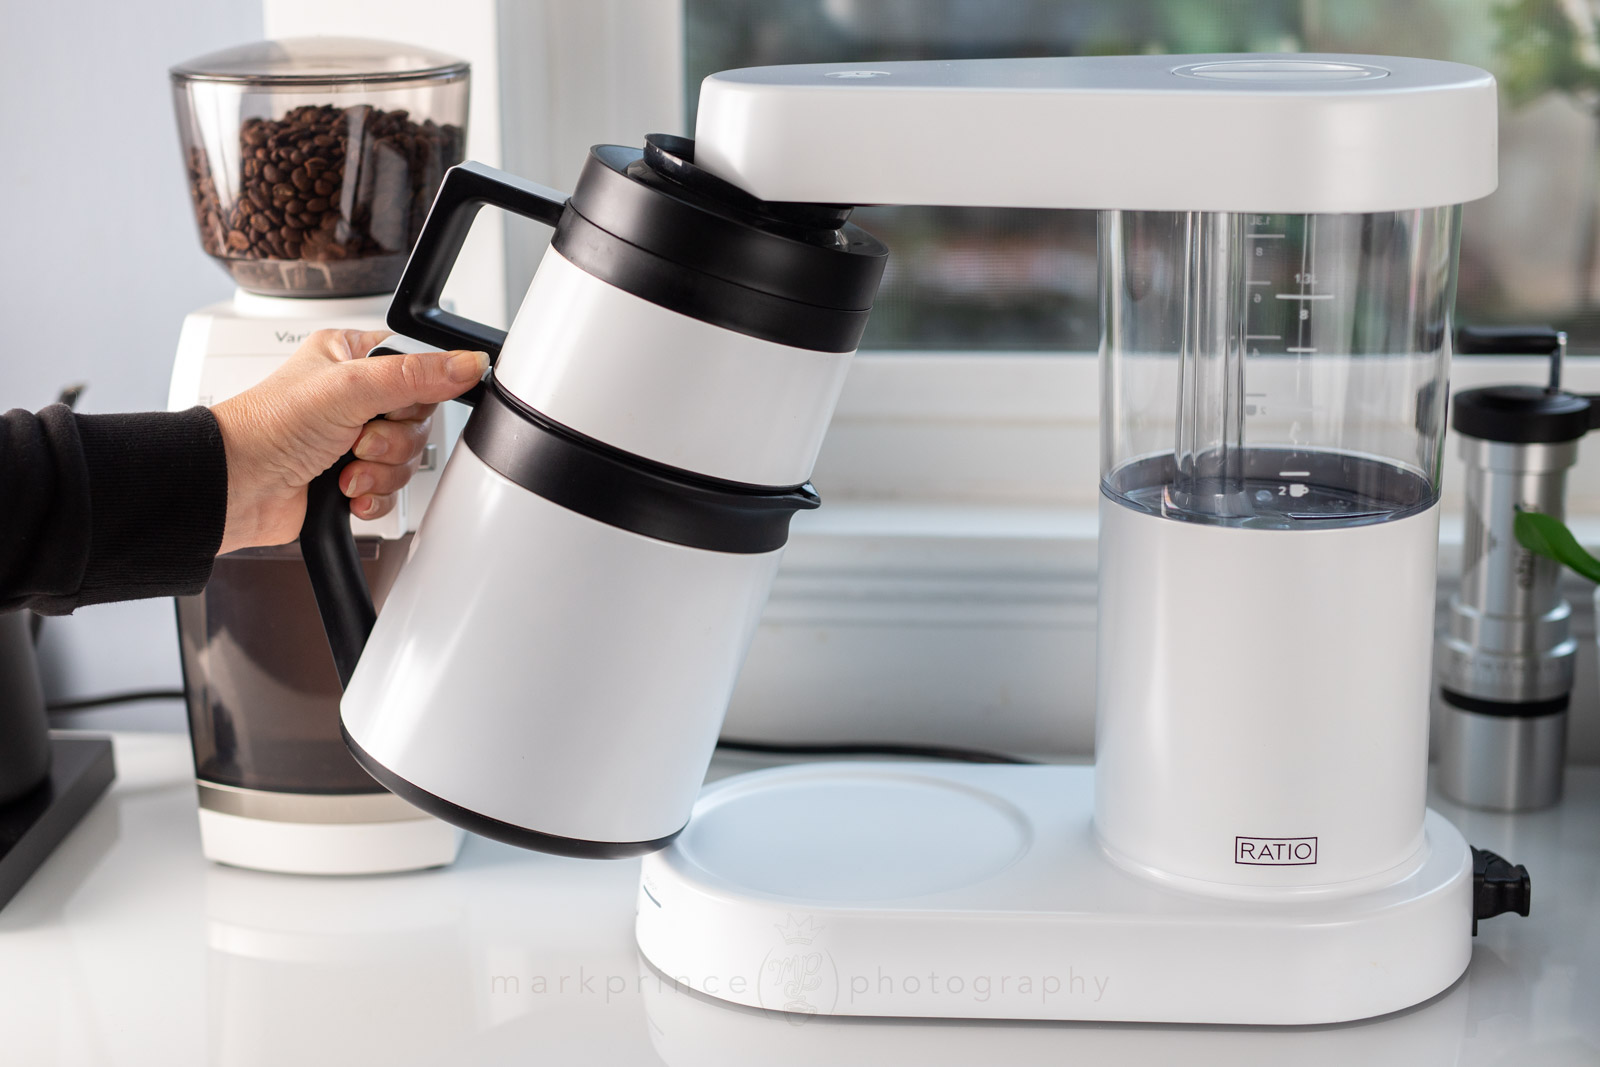 We've been testing the Ratio Six coffee brewer from